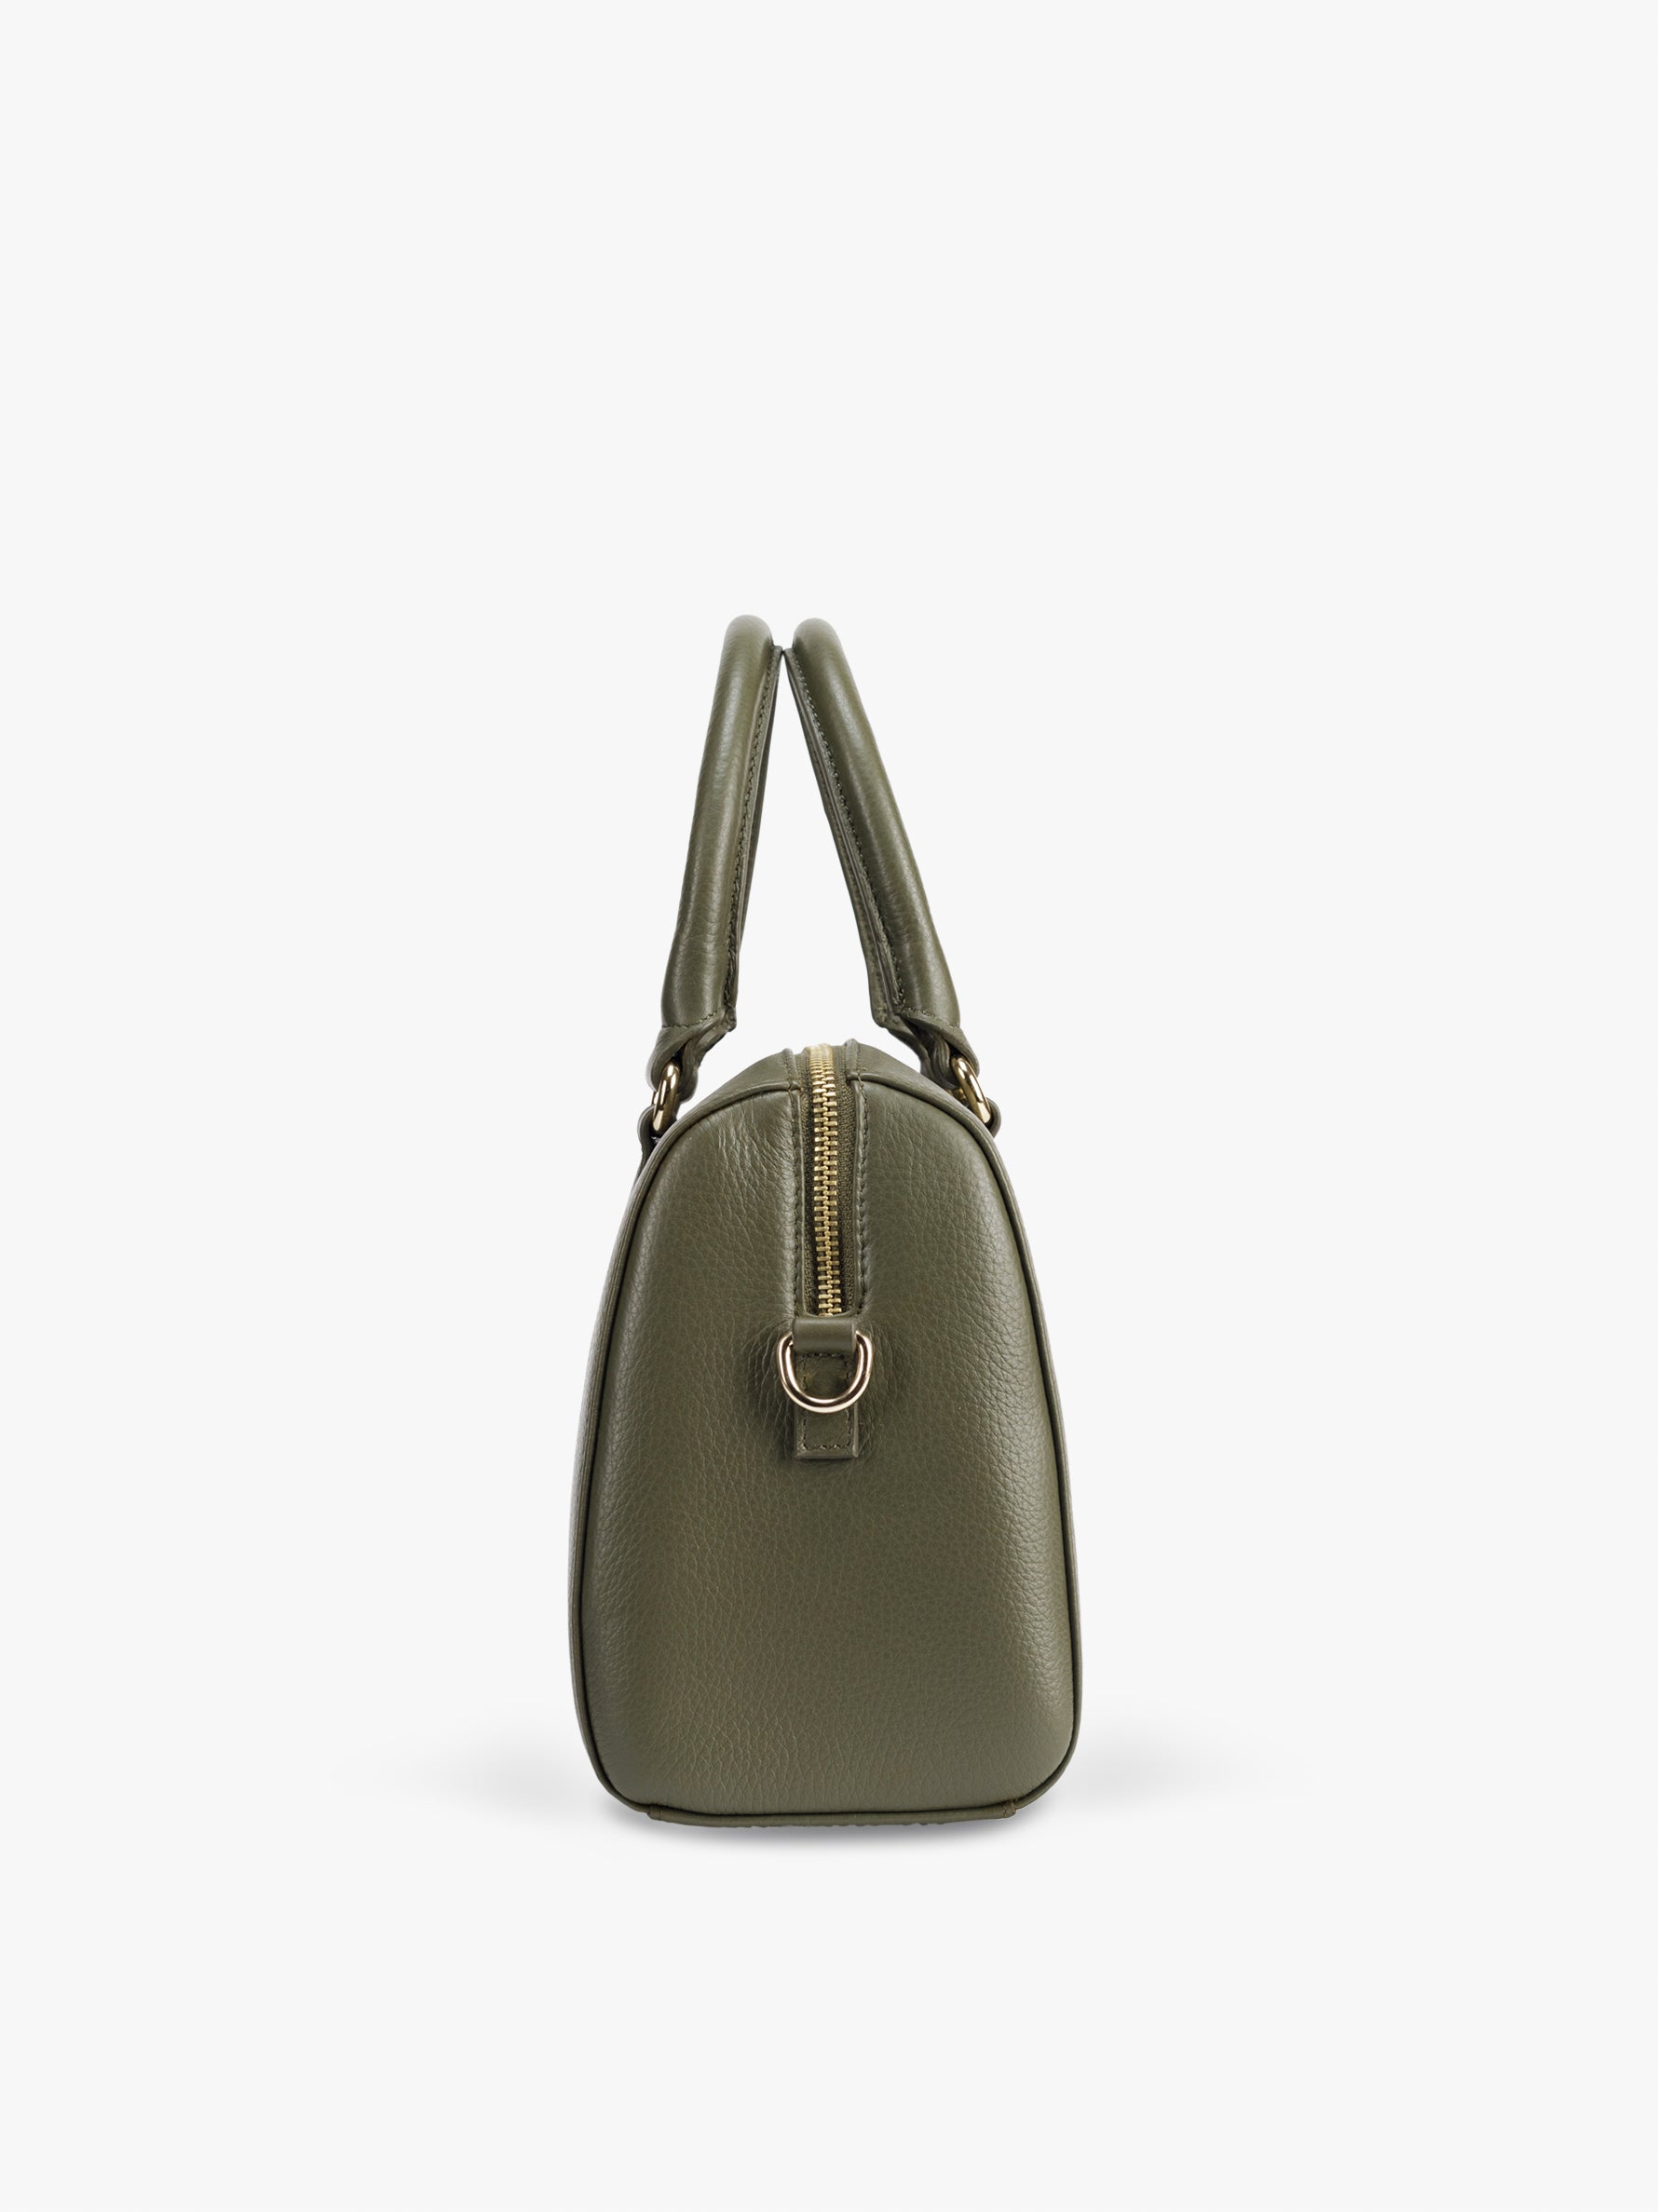 Handcrafted genuine leather boston bag for women Olive green